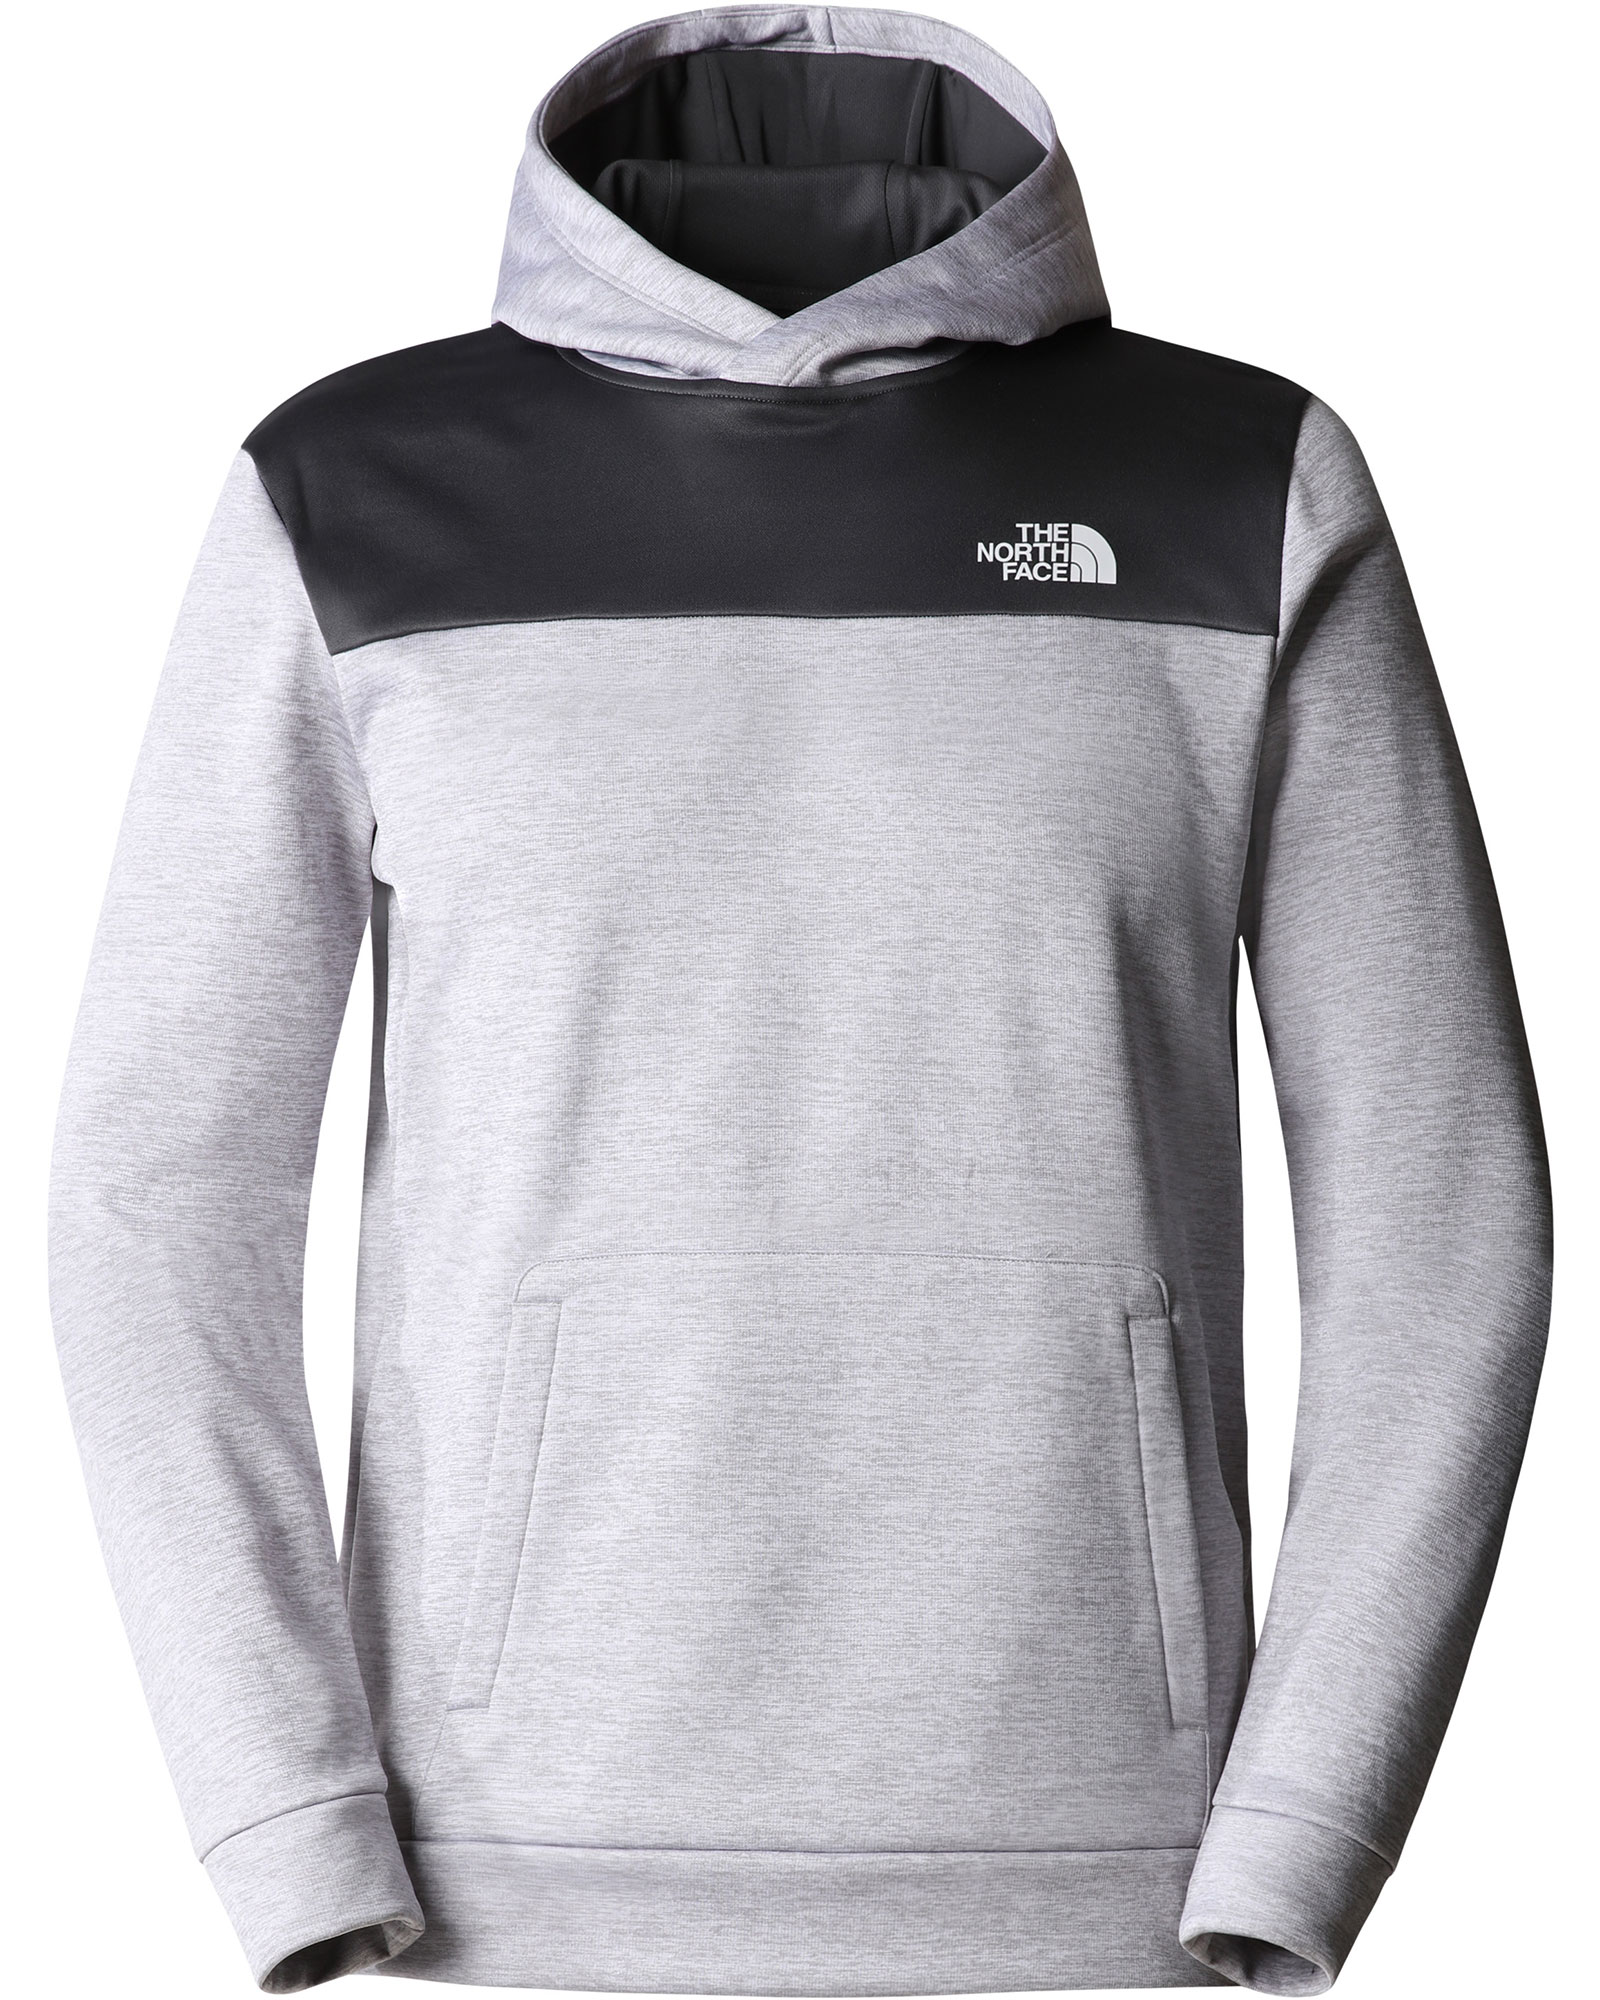 The North Face Reaxion Fleece Mens Pullover Hoodie